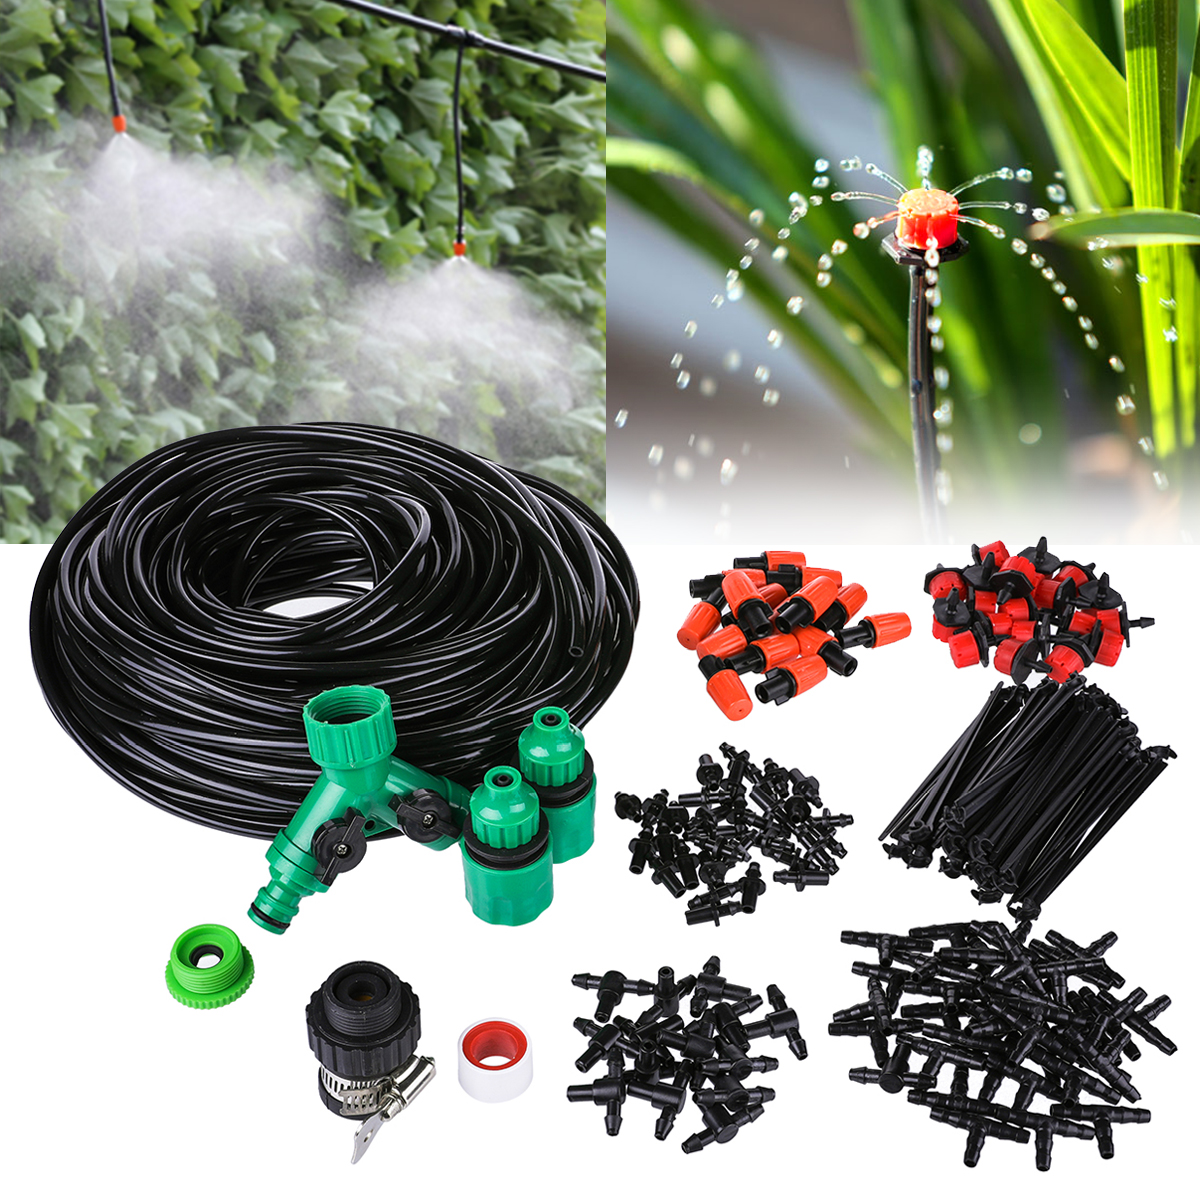 OUTERDO-40M-Mist-Cooling-Irrigation-System-Micro-Drip-Irrigation-Kit-Garden-Patio-Plant-Watering-Kit-1537233-3